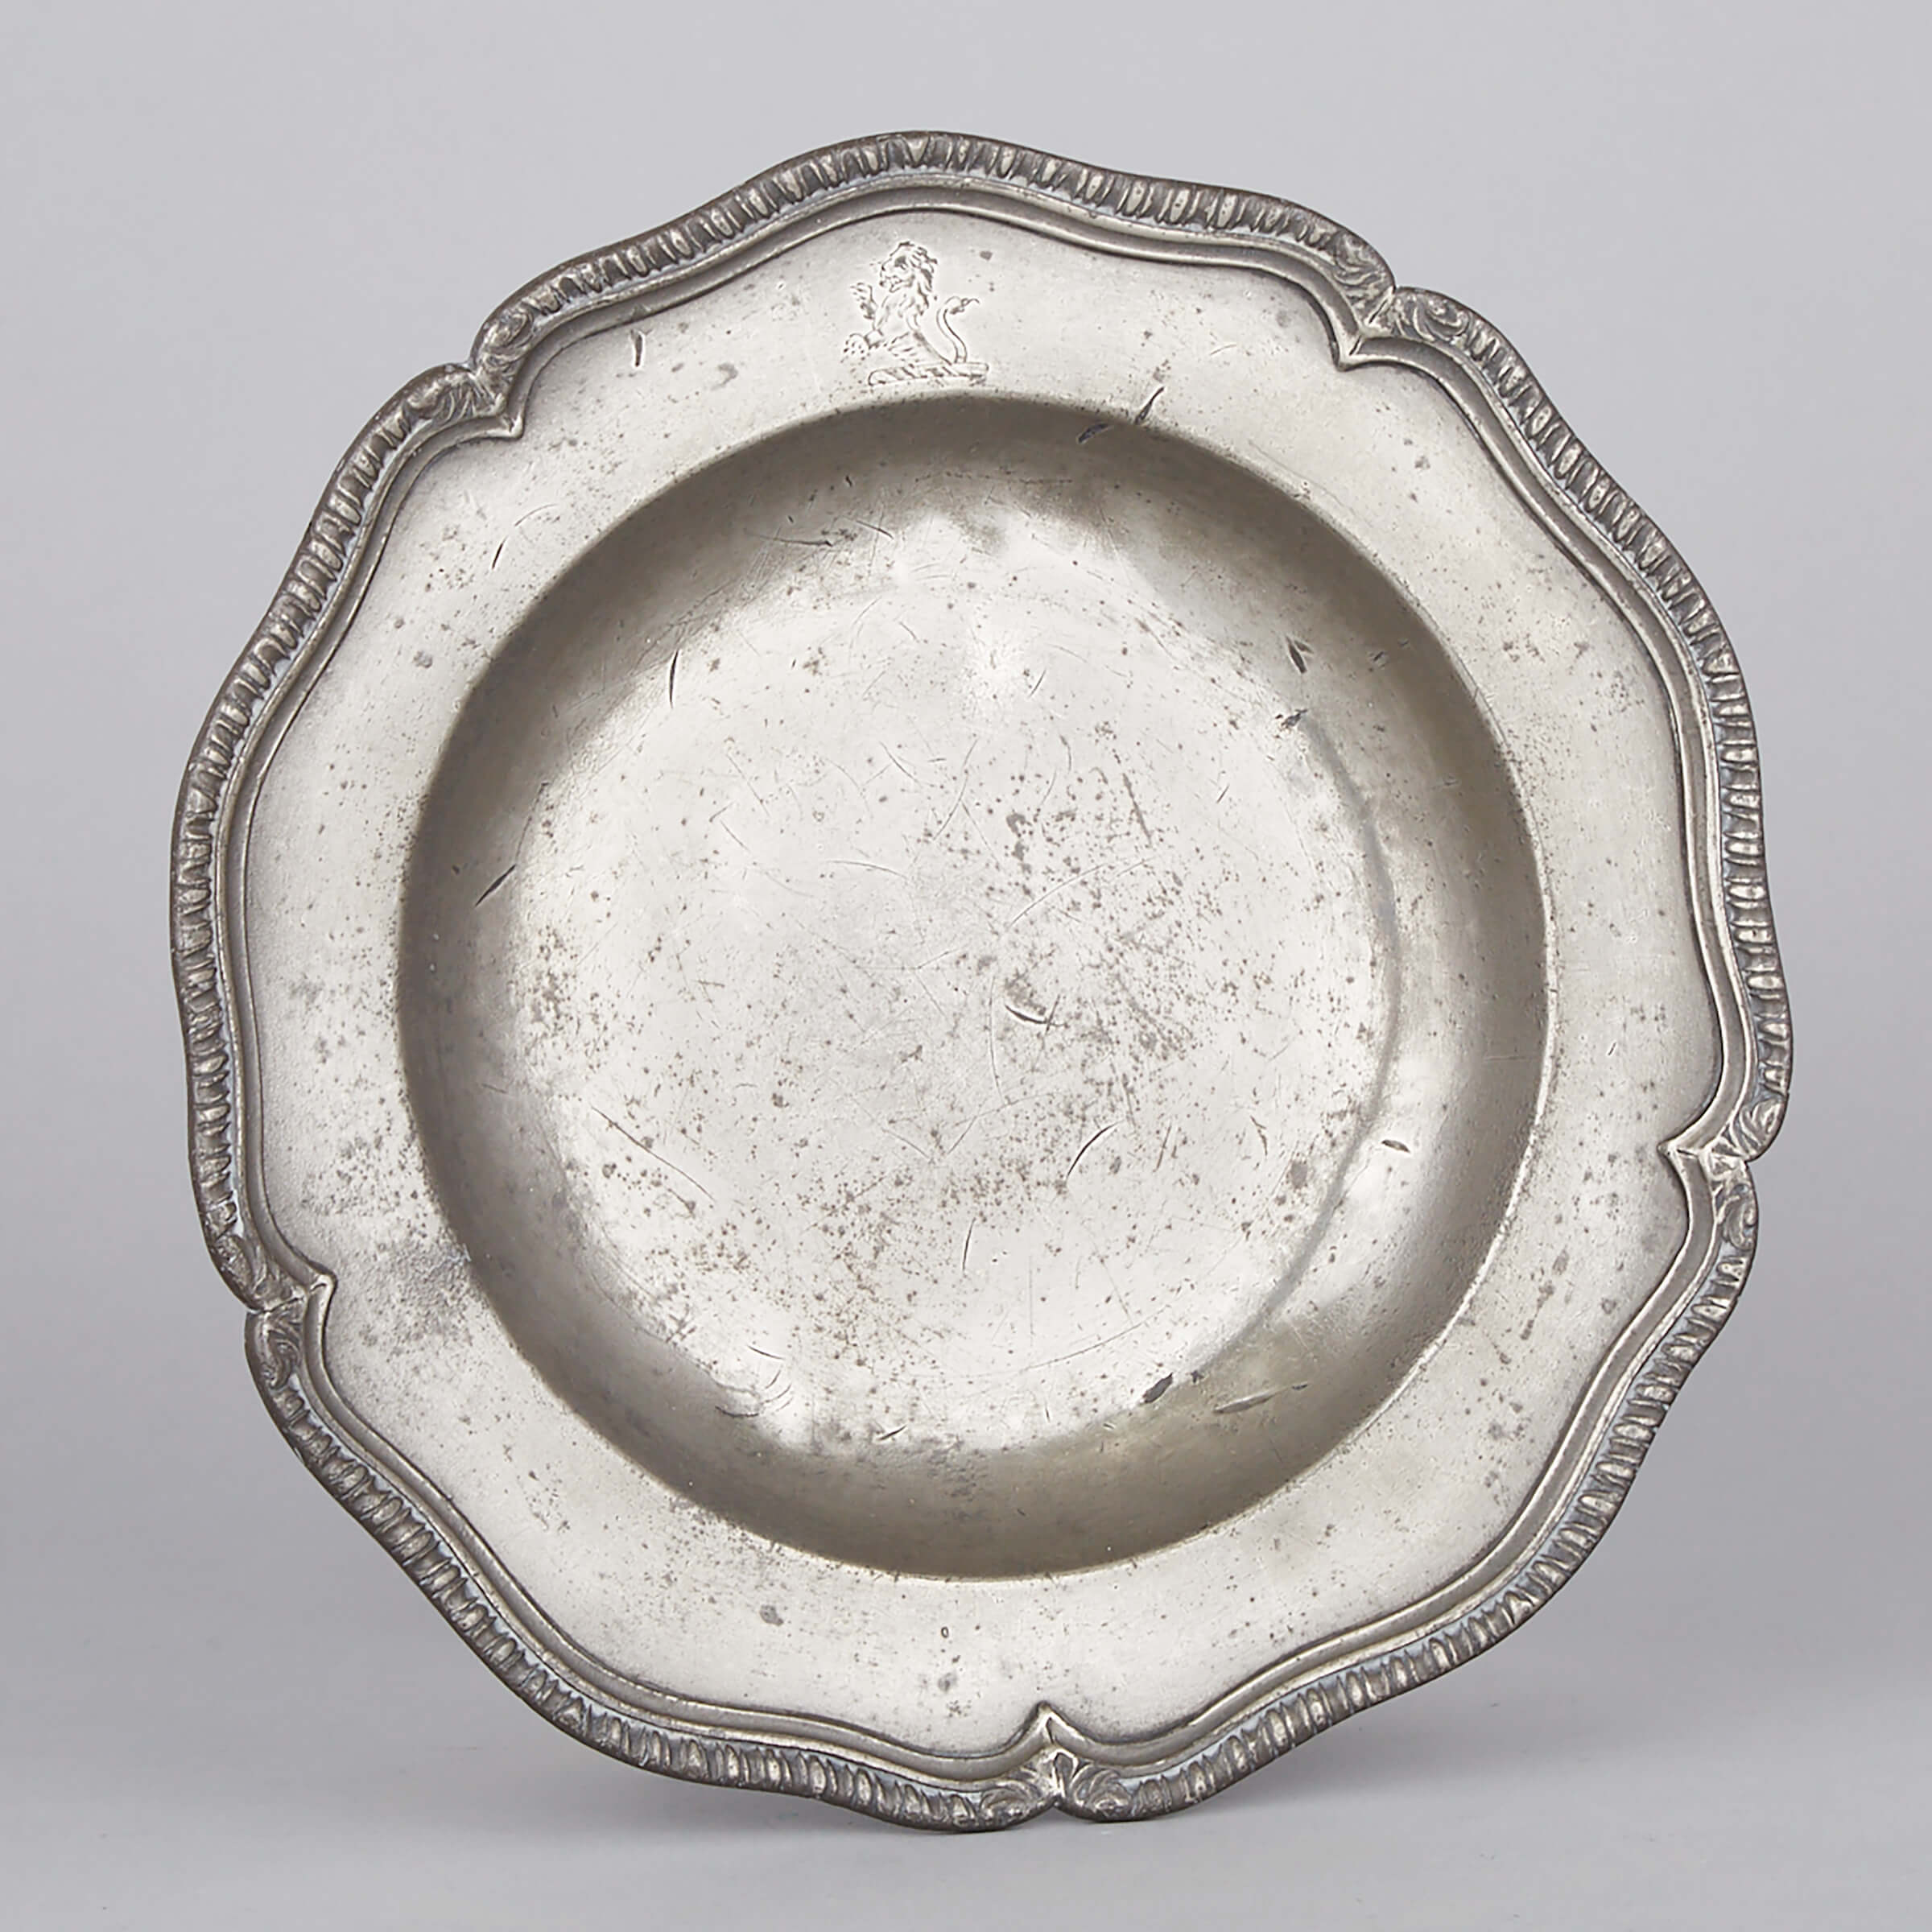 English Pewter Wavy Edge Gadrooned Rim Soup Bowl, Robert Patience, London, mid 18th century